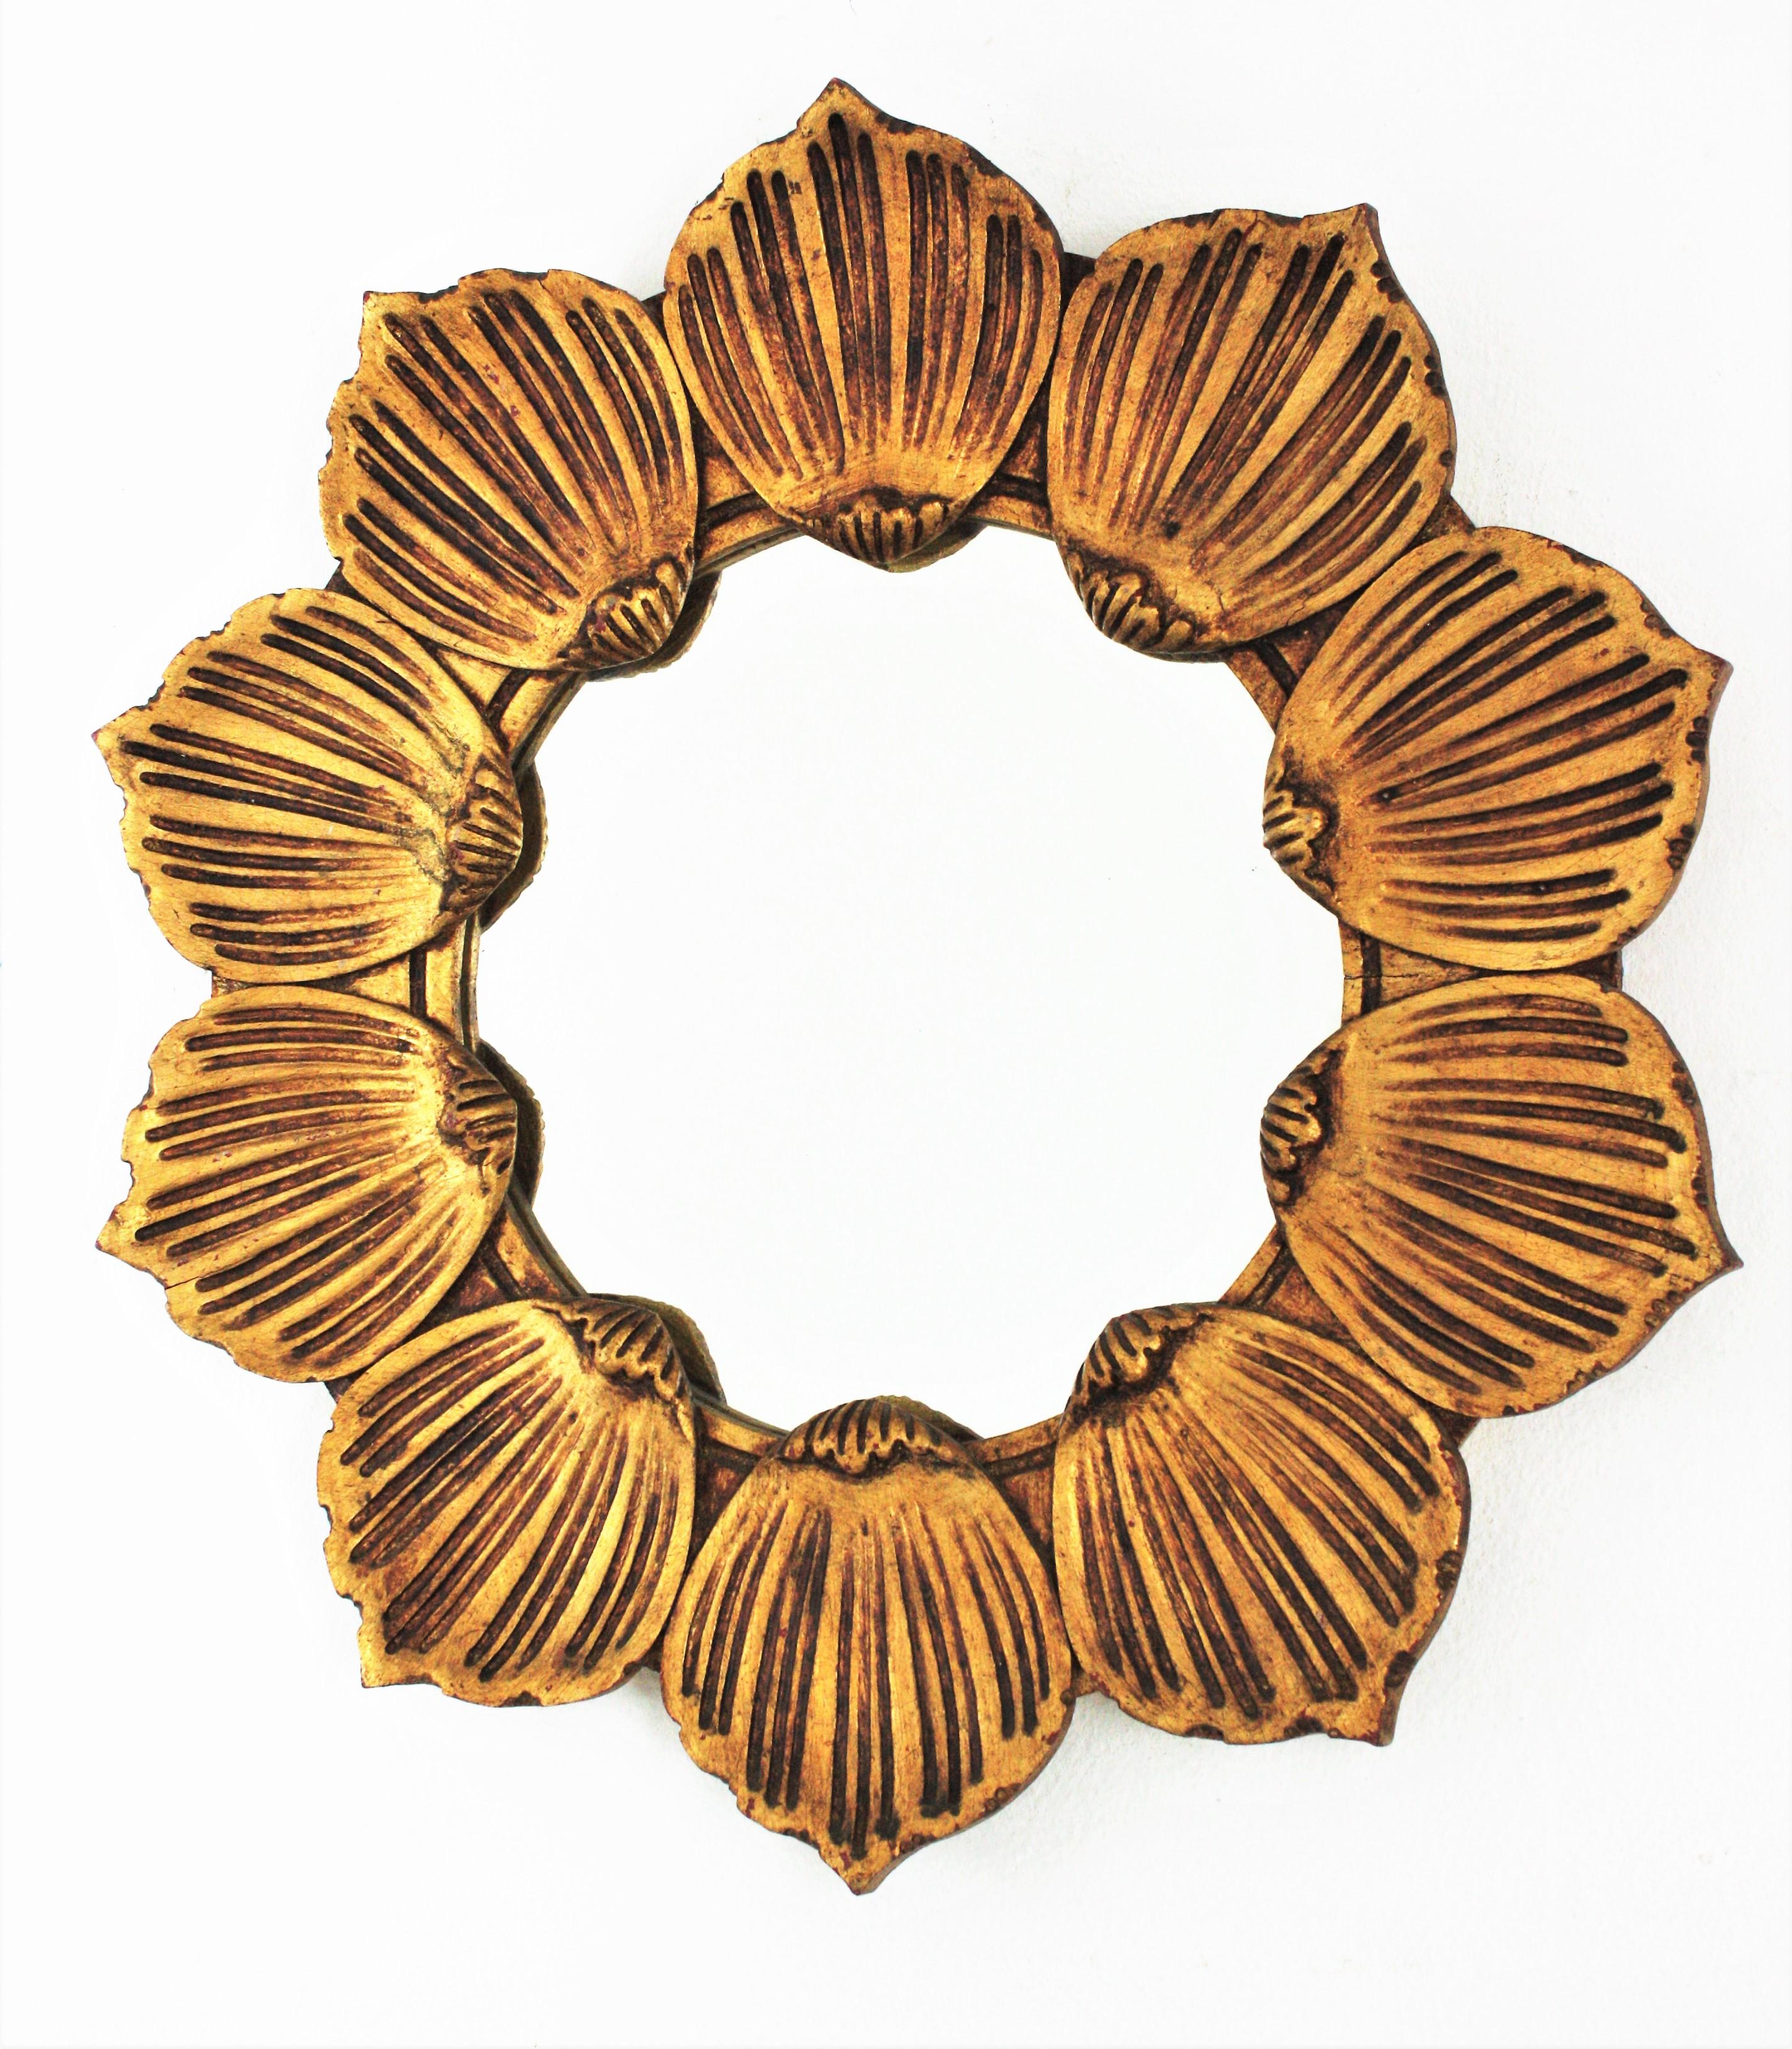 Francisco Hurtado Giltwood Sunburst Flower Mirror
Unique wood carved flower shaped mirror with gold leaf finish. Manufactured by Francisco Hurtado, Spain 1960s.
This mirror was handcrafted at the Mid-Century Modern period in the Hollywood Regency